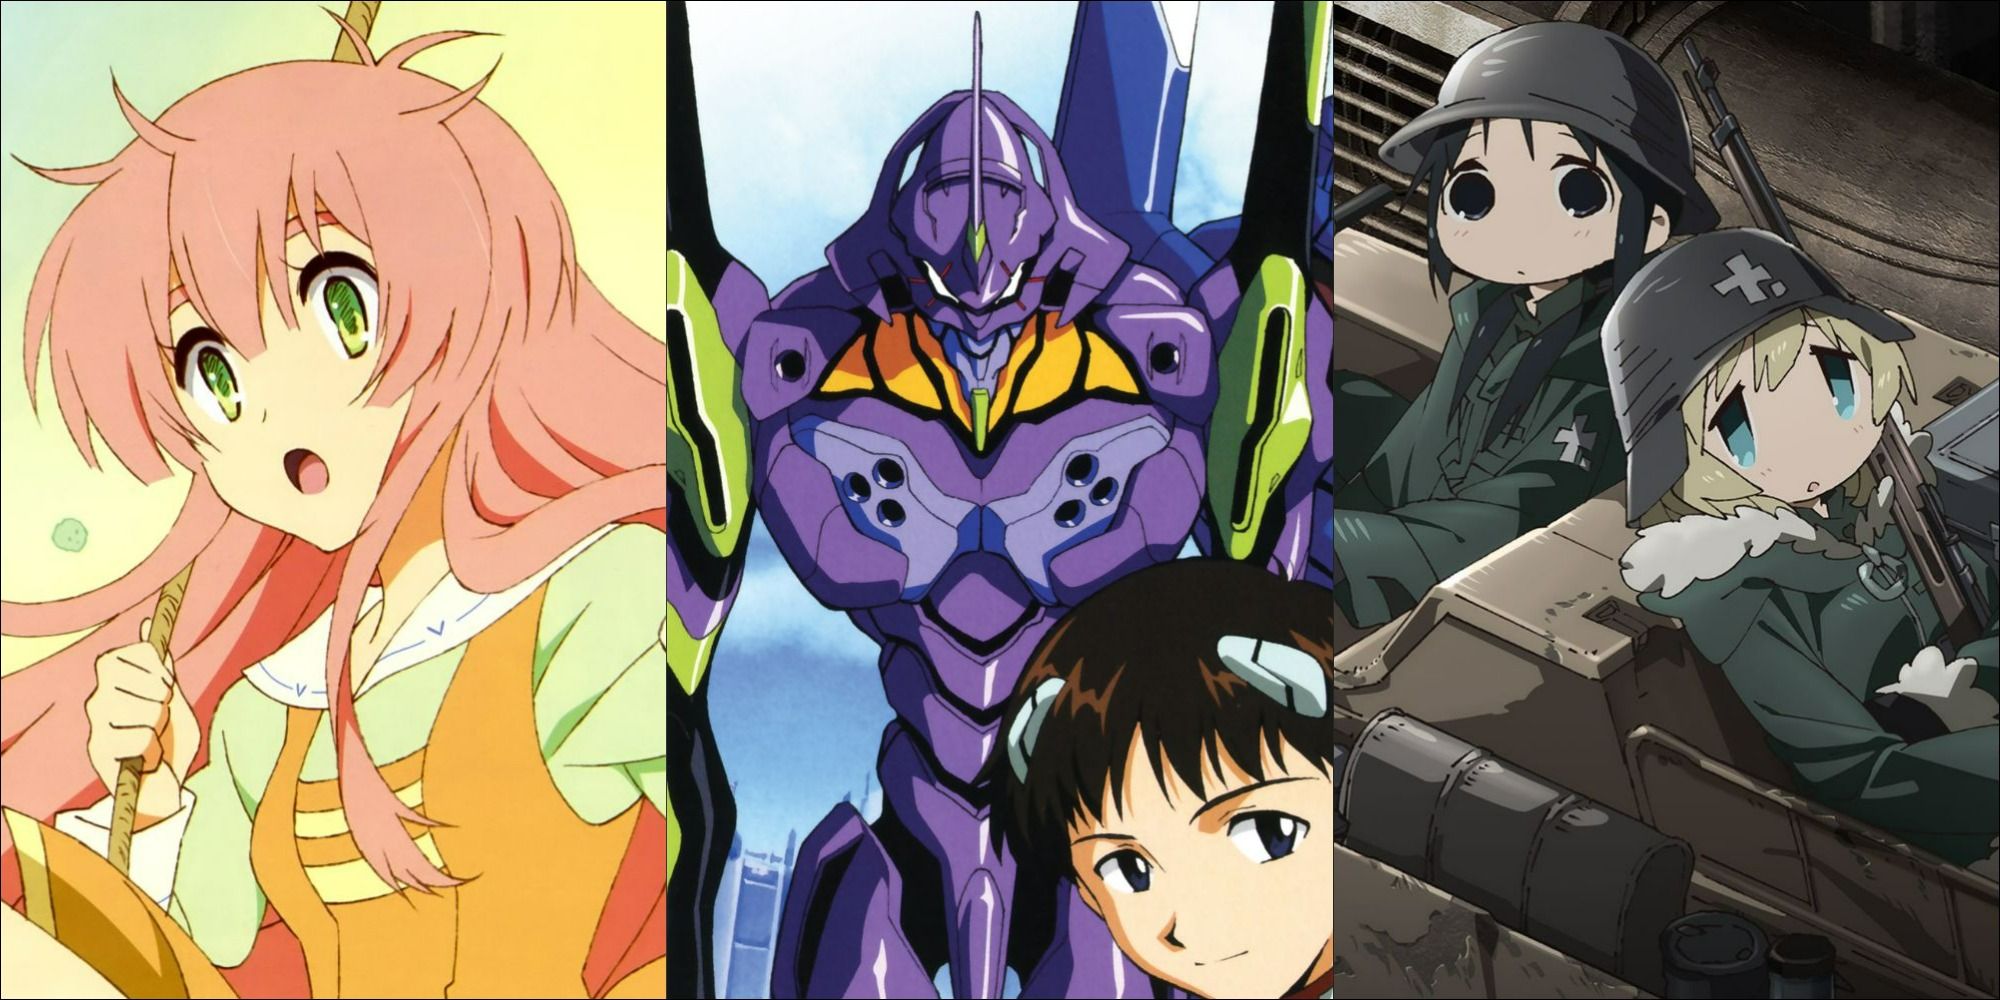 Characters from Humanity Has Declined, Neon Genesis Evangelion, and Girls' Last Tour